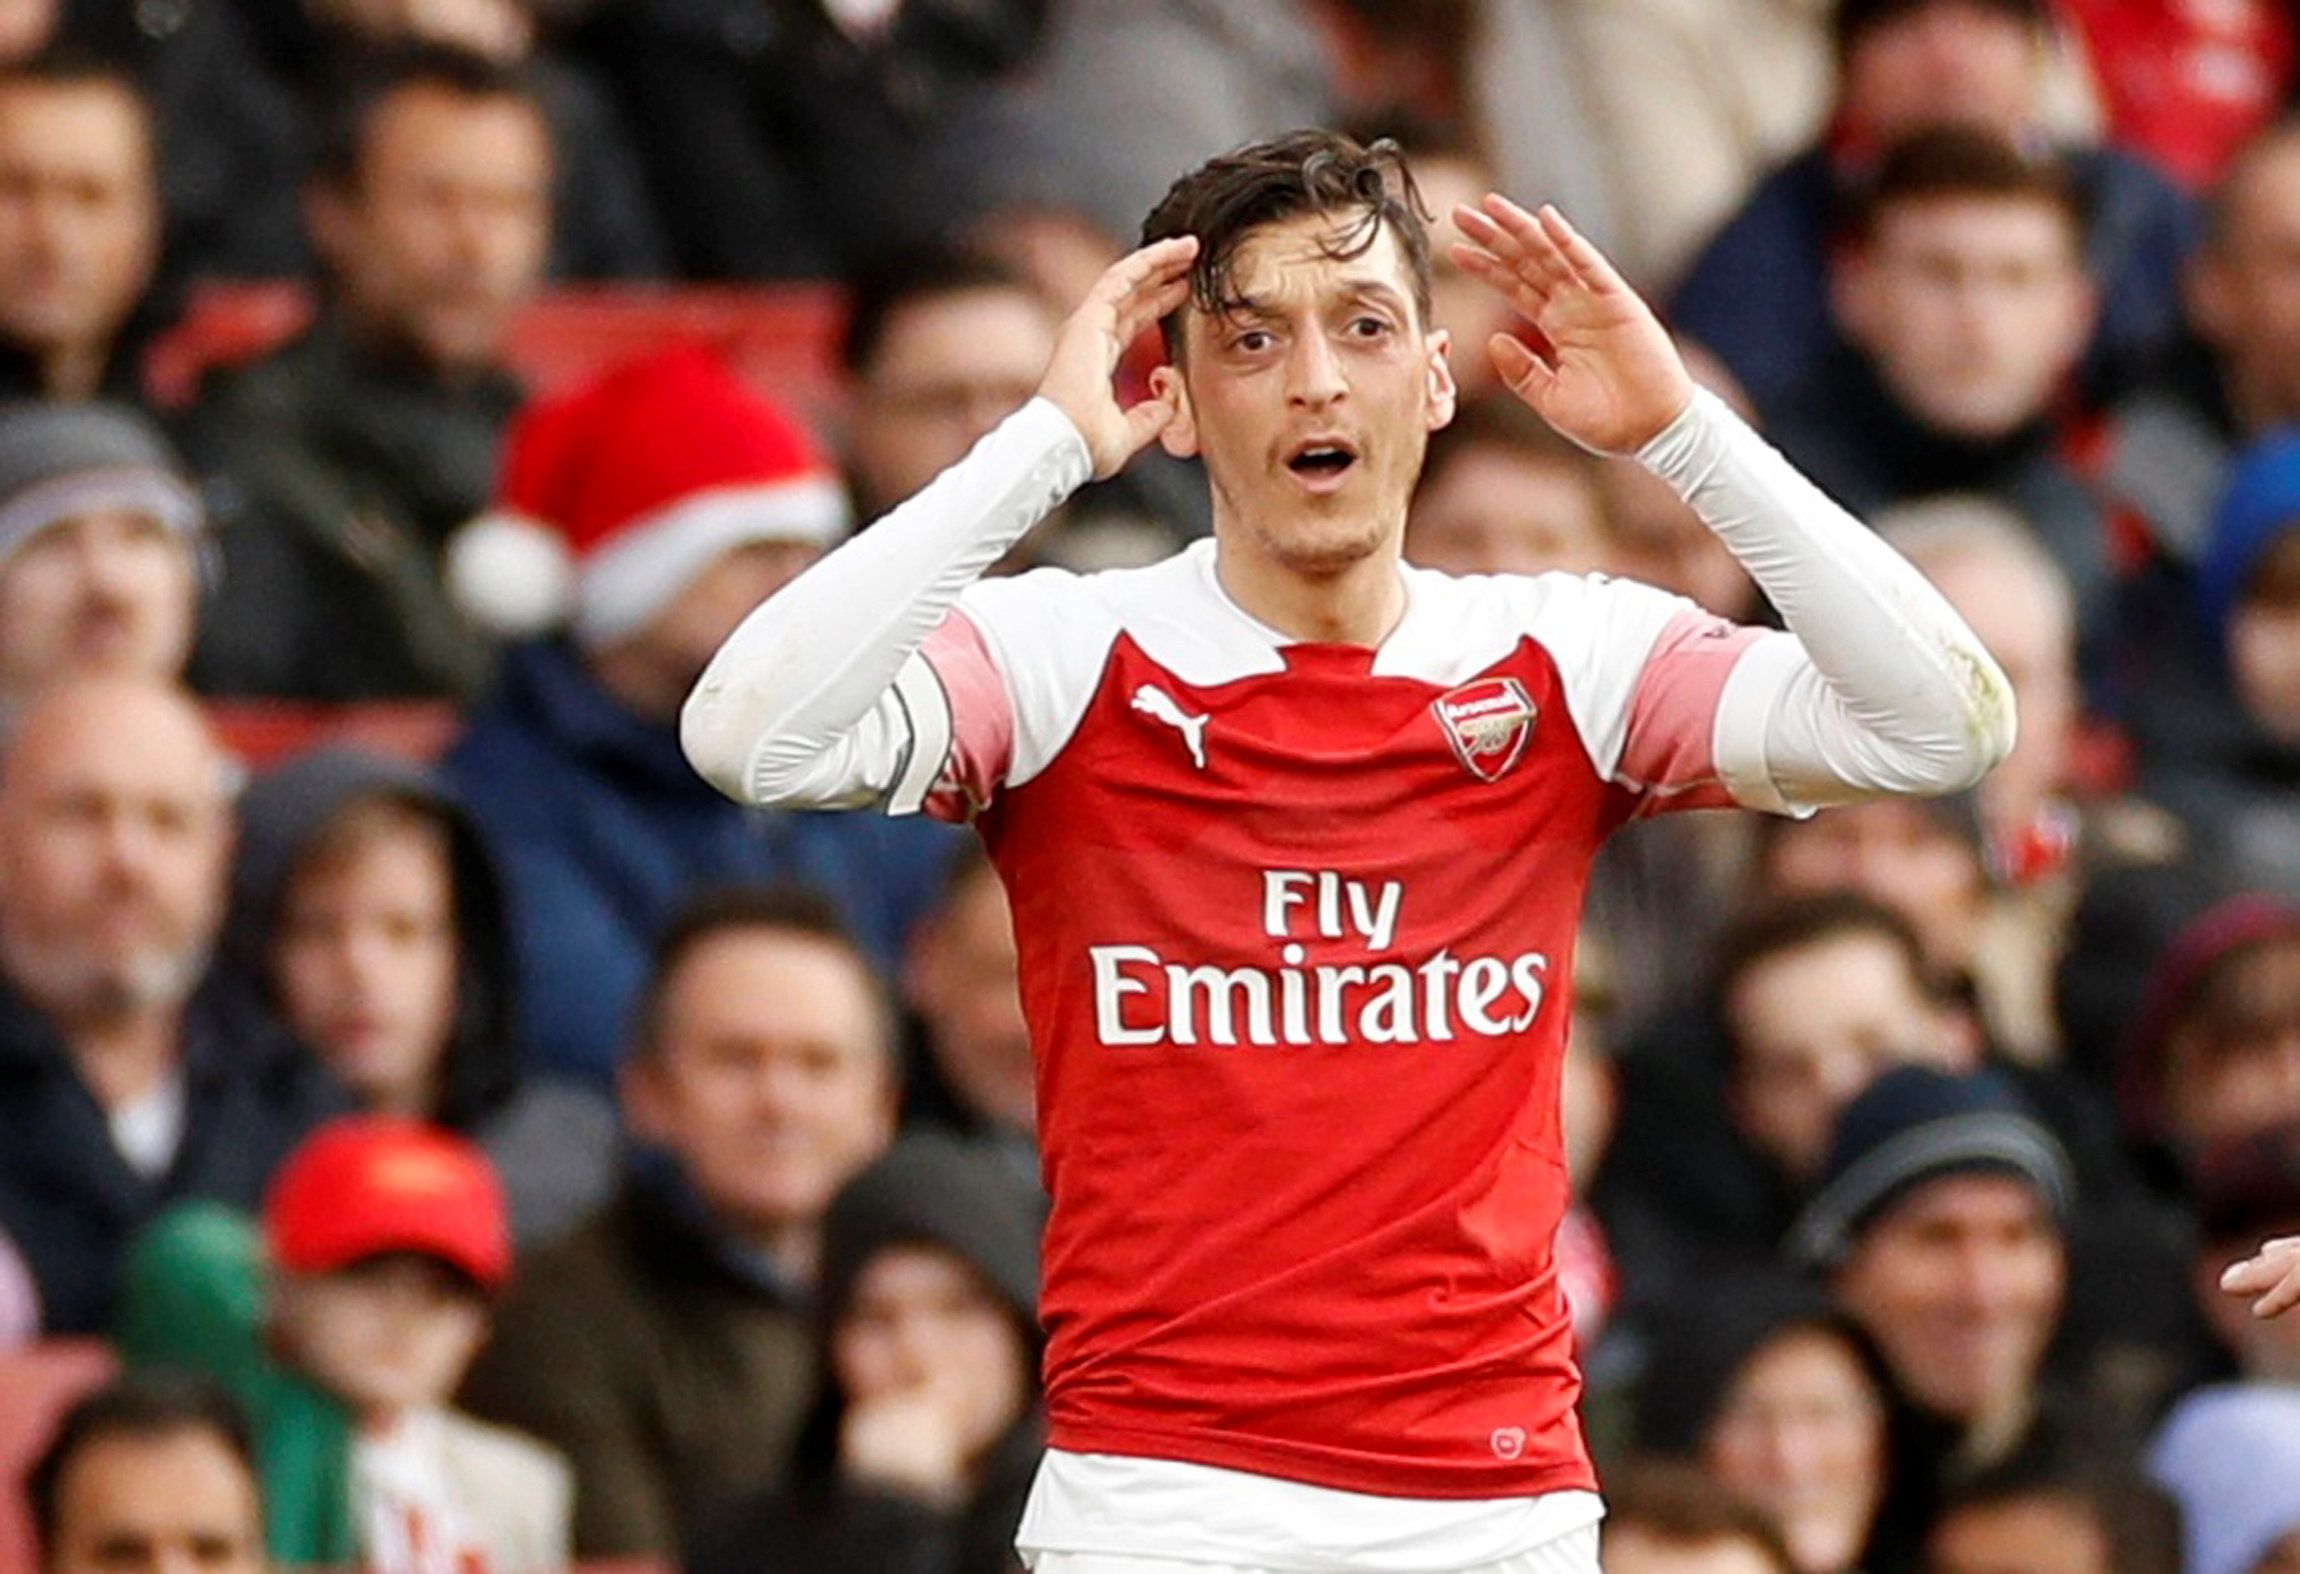 Soccer Football - Premier League - Arsenal v Burnley - Emirates Stadium, London, Britain - December 22, 2018  Arsenal's Mesut Ozil reacts  Action Images via Reuters/John Sibley  EDITORIAL USE ONLY. No use with unauthorized audio, video, data, fixture lists, club/league logos or 